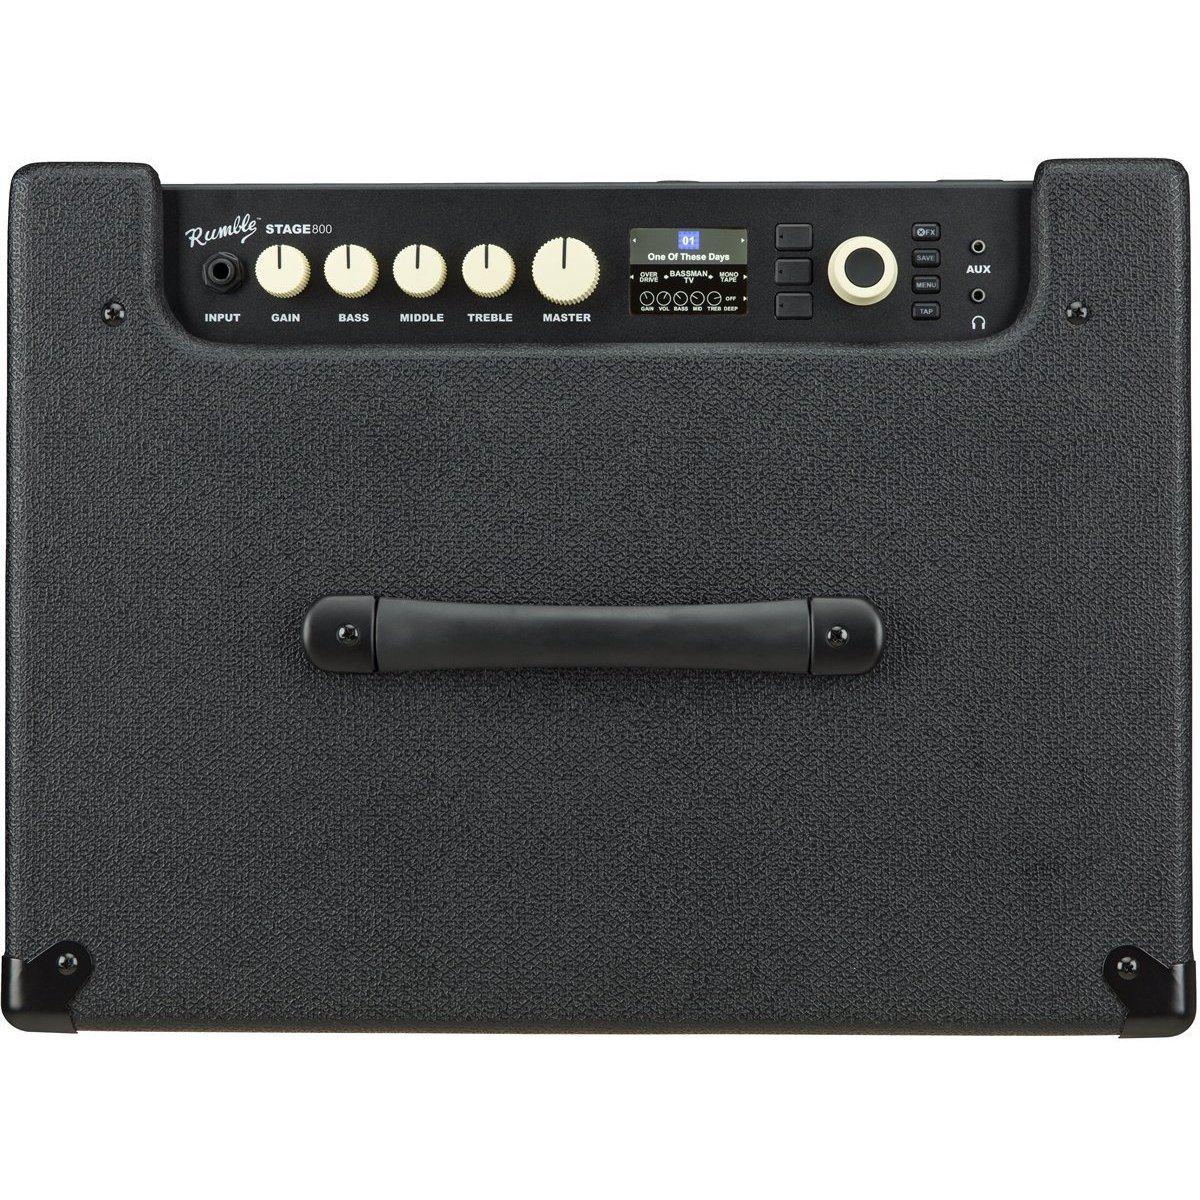 Amplifiers - Fender Stage 800